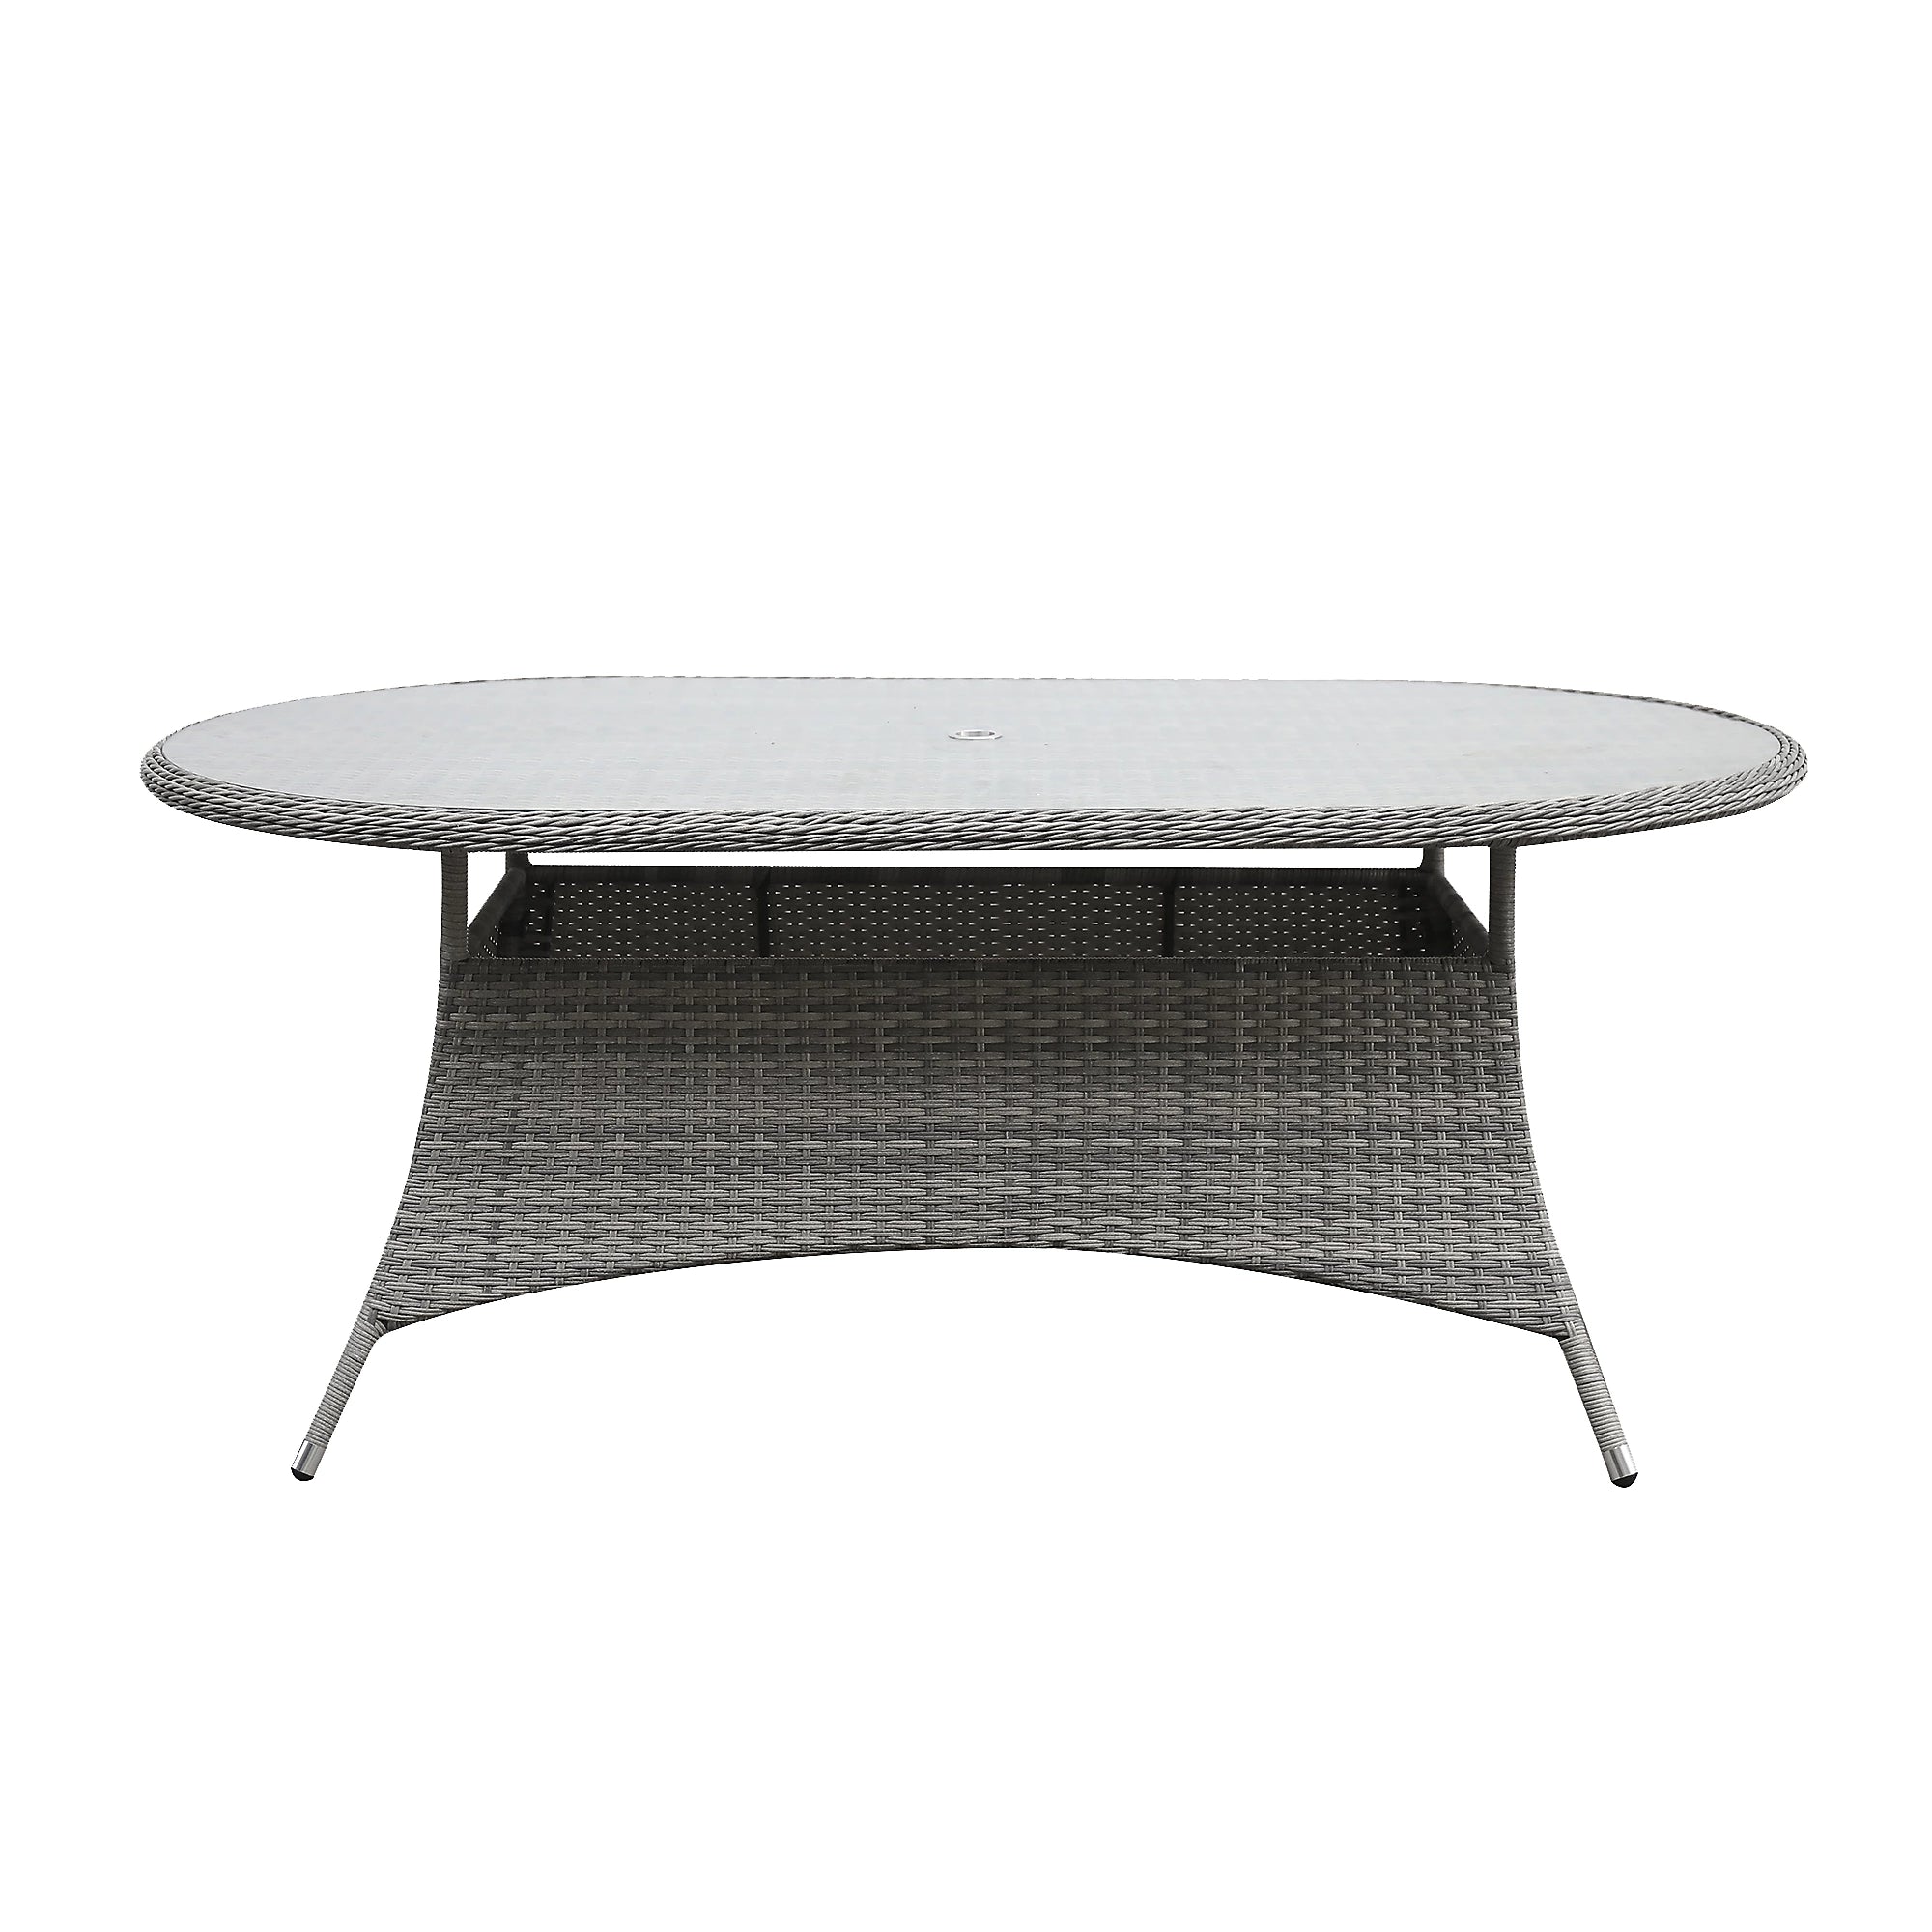 GoodHome Hamilton Rattan effect 6 seater Dining table 7314